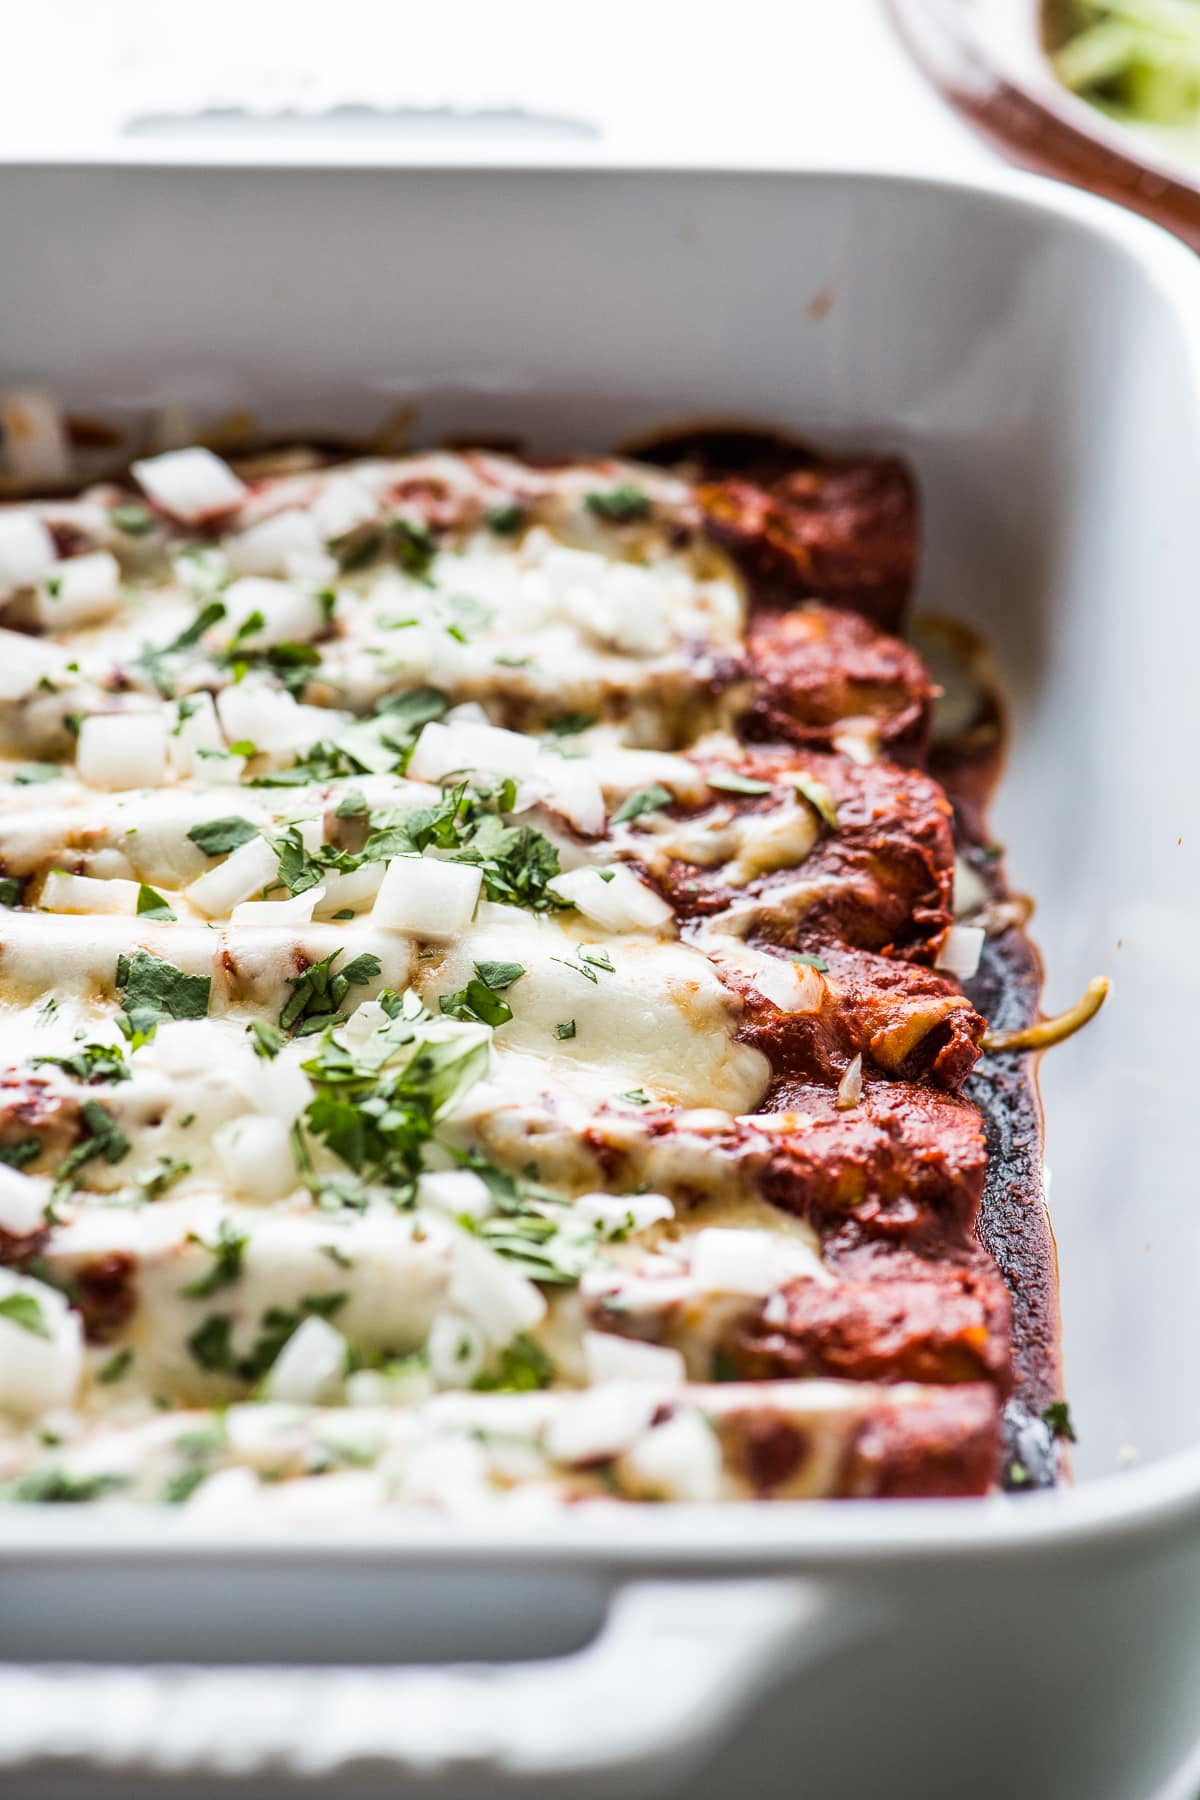 Cheese enchiladas topped with melted cheese, cilantro, and onions.